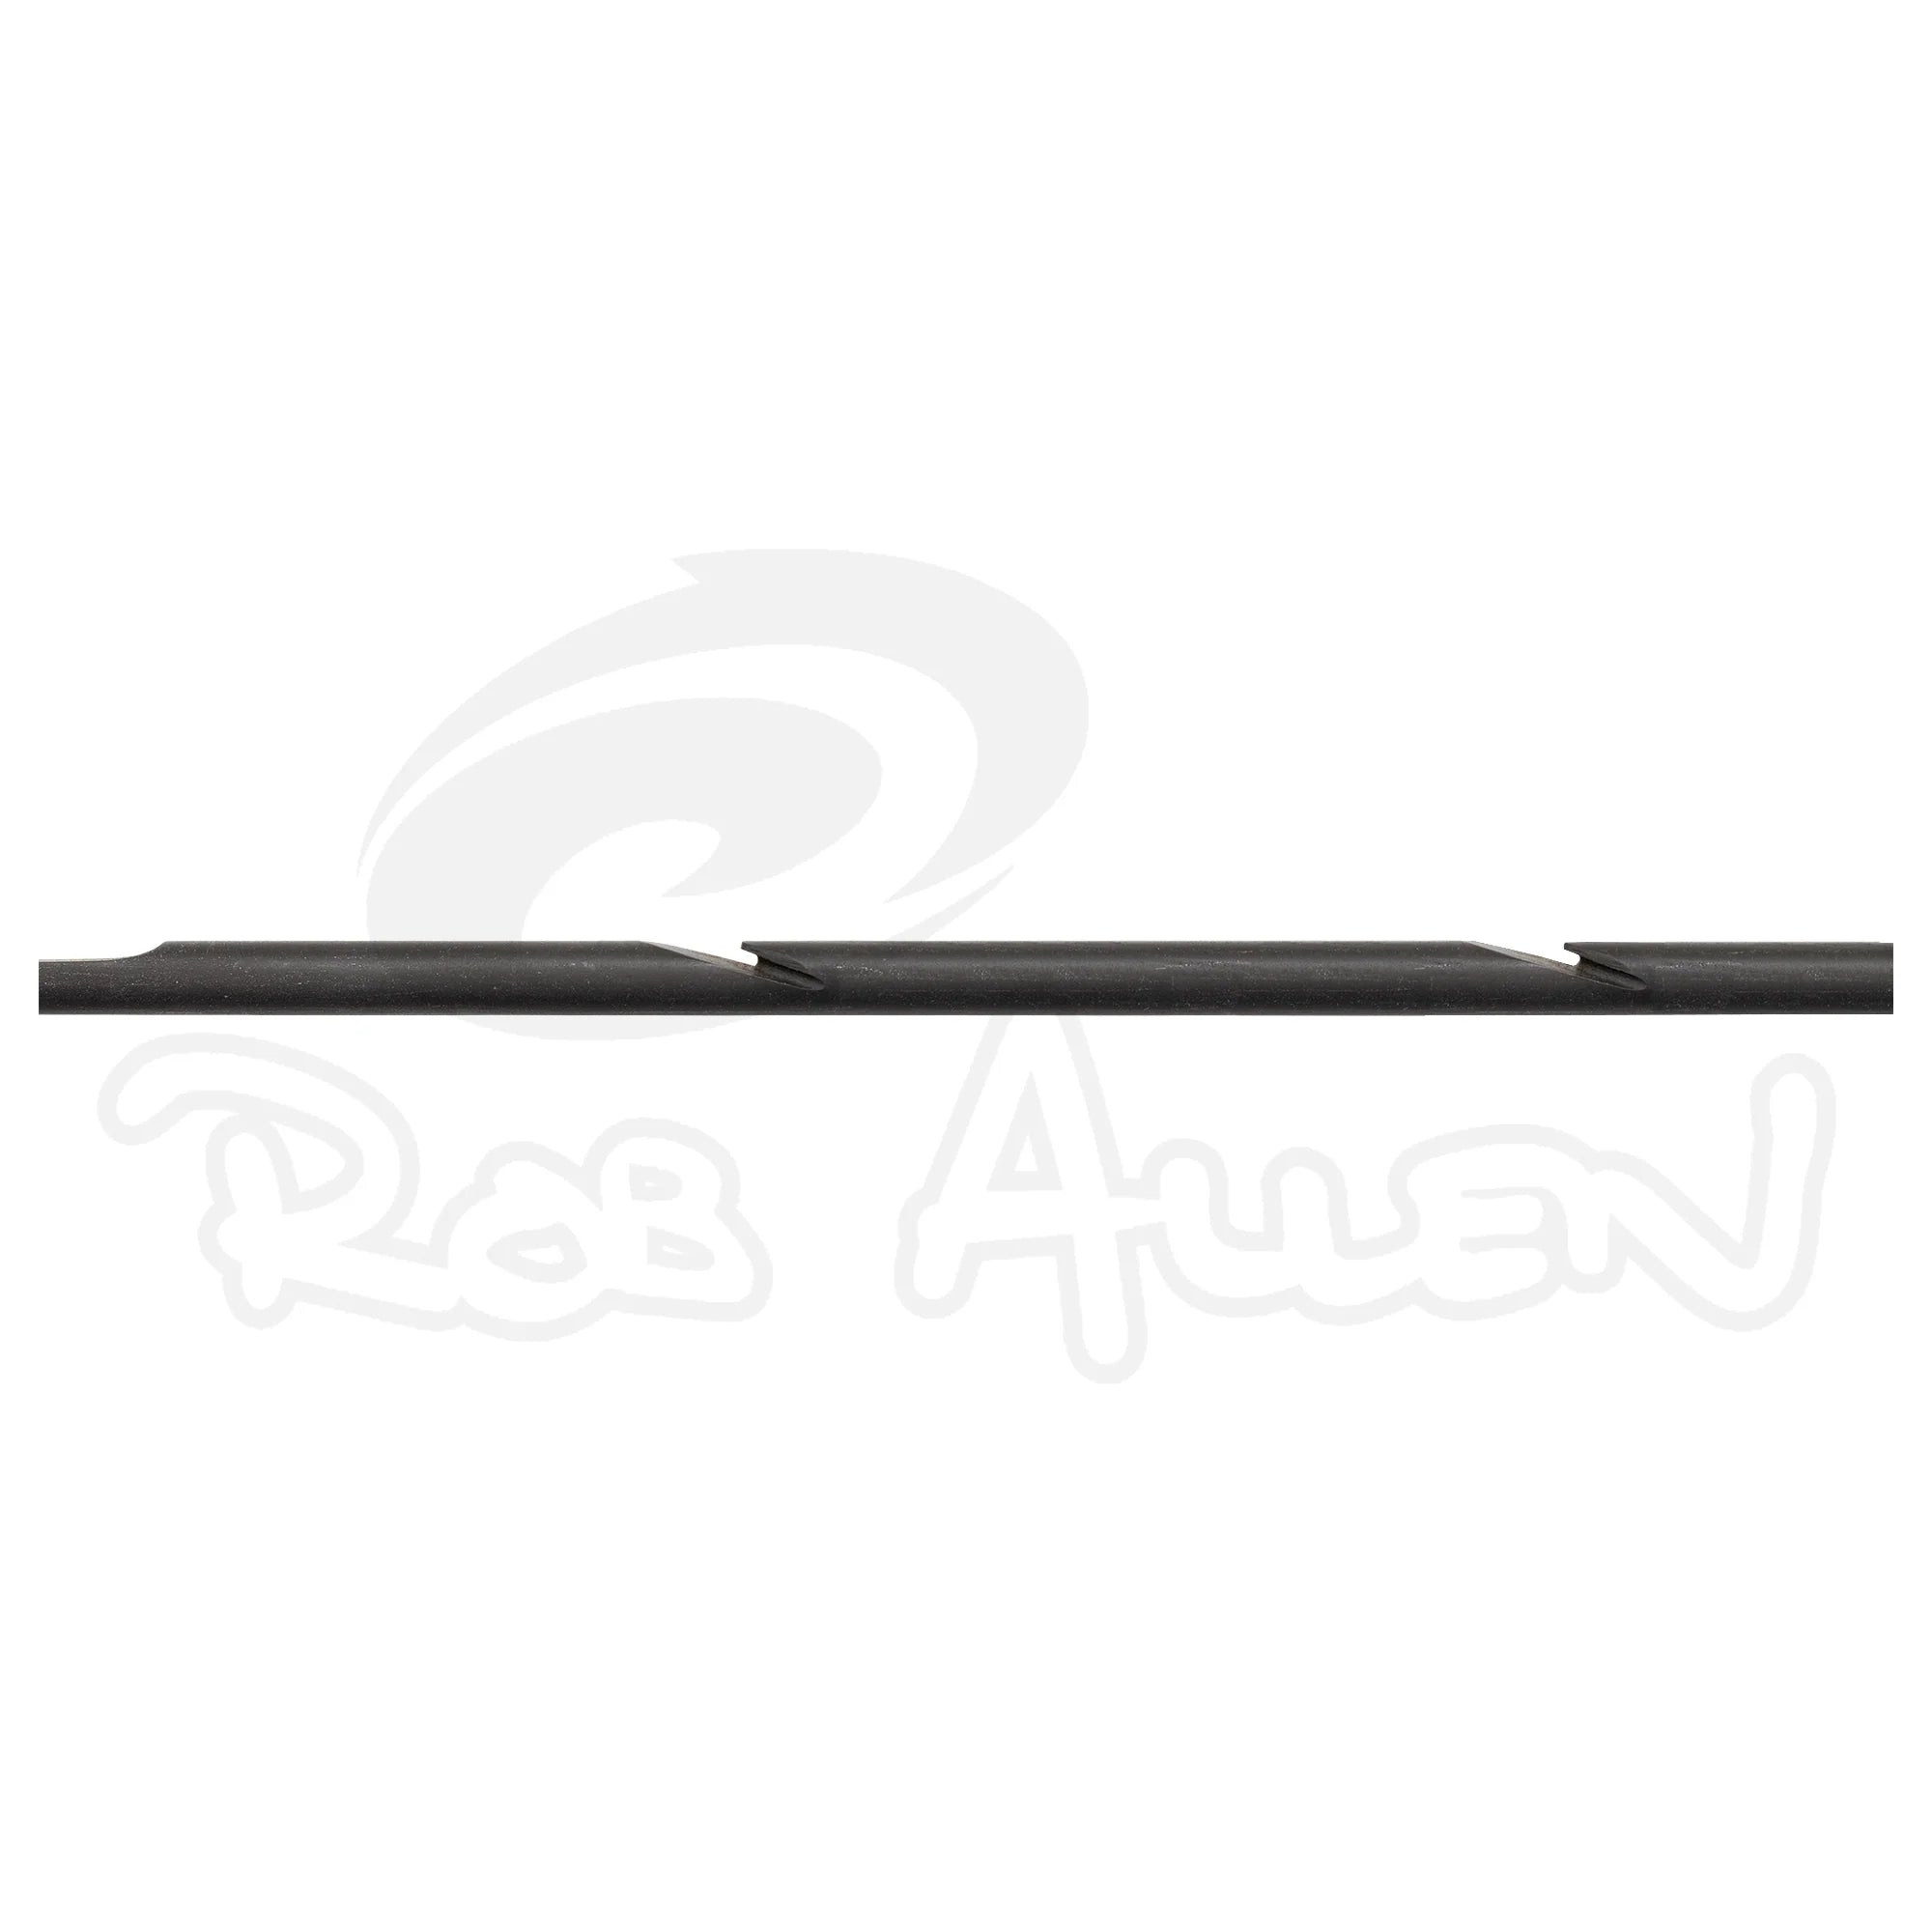 Rob Allen Spear 7.5mm Double Notched - FreedivingWarehouse